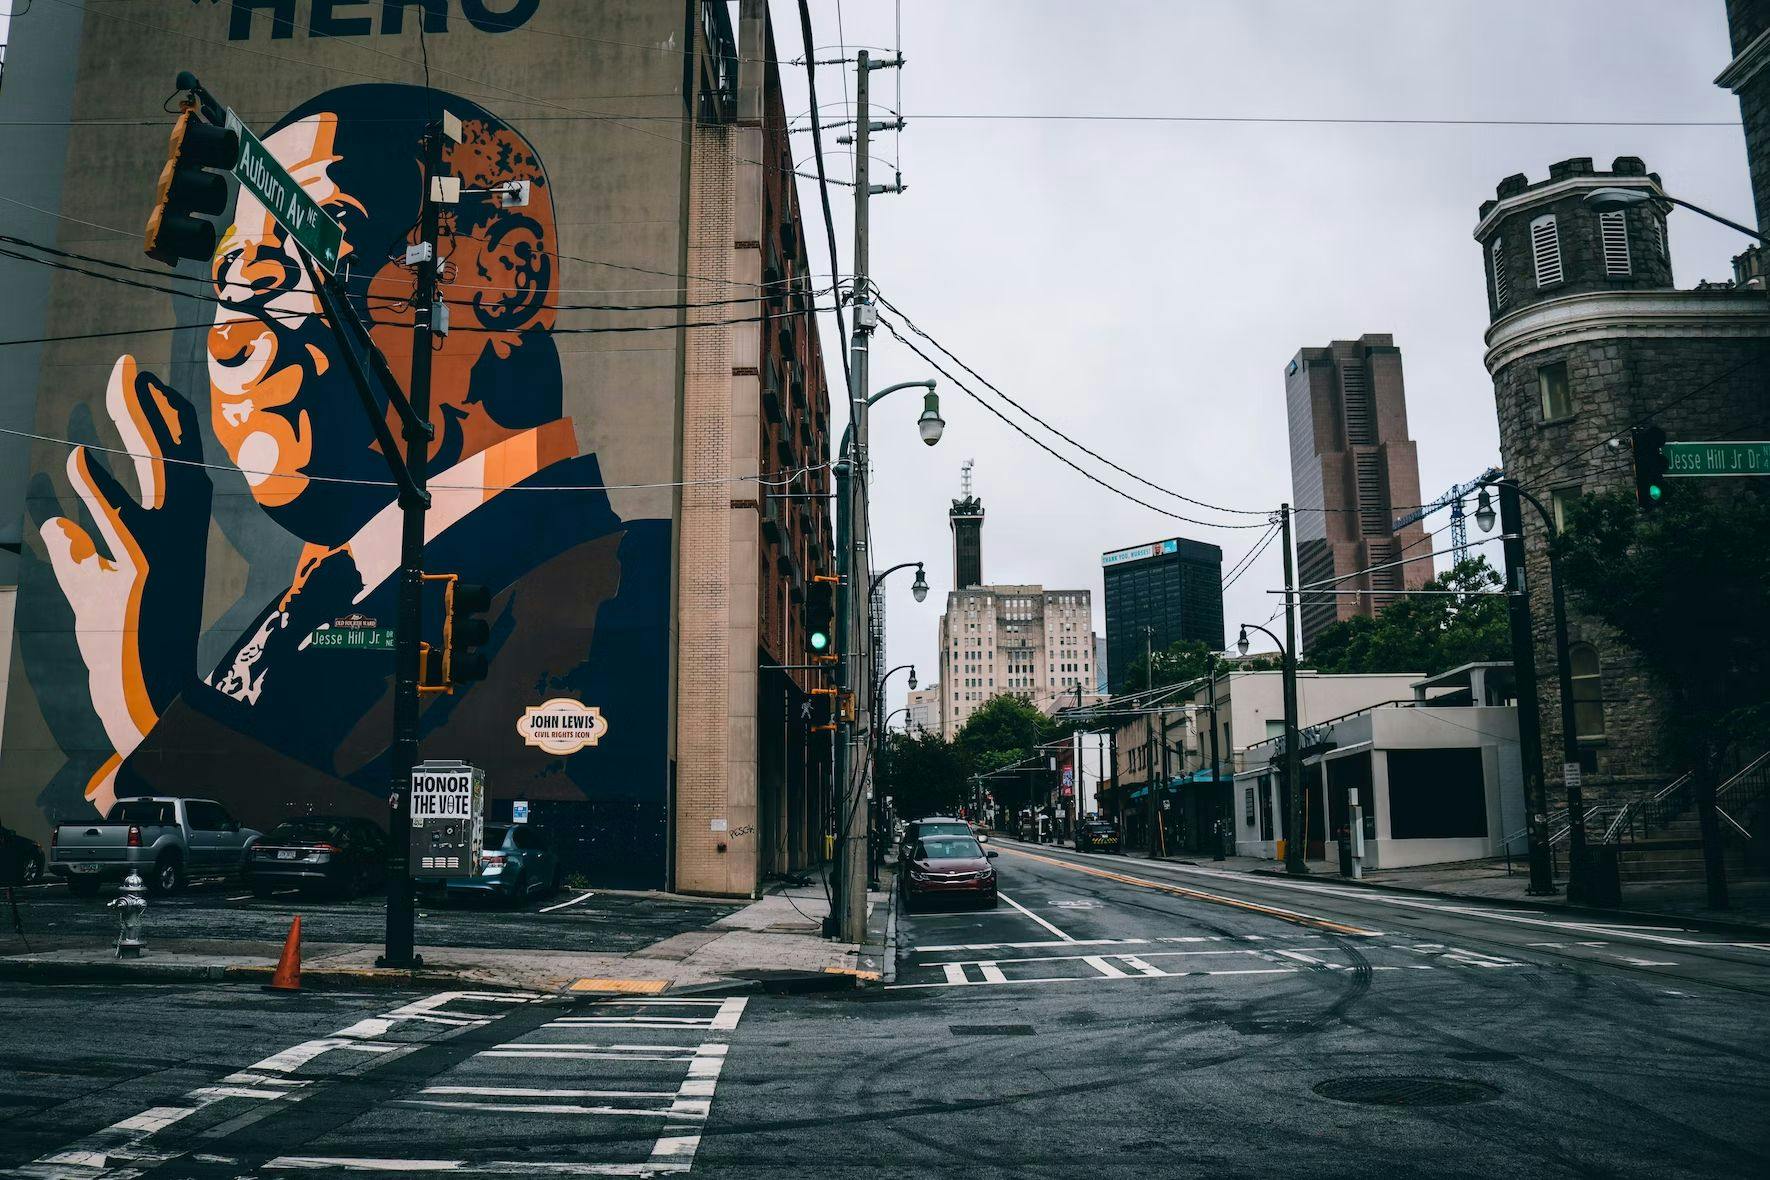 A mural depicting civil rights icon John Lewis